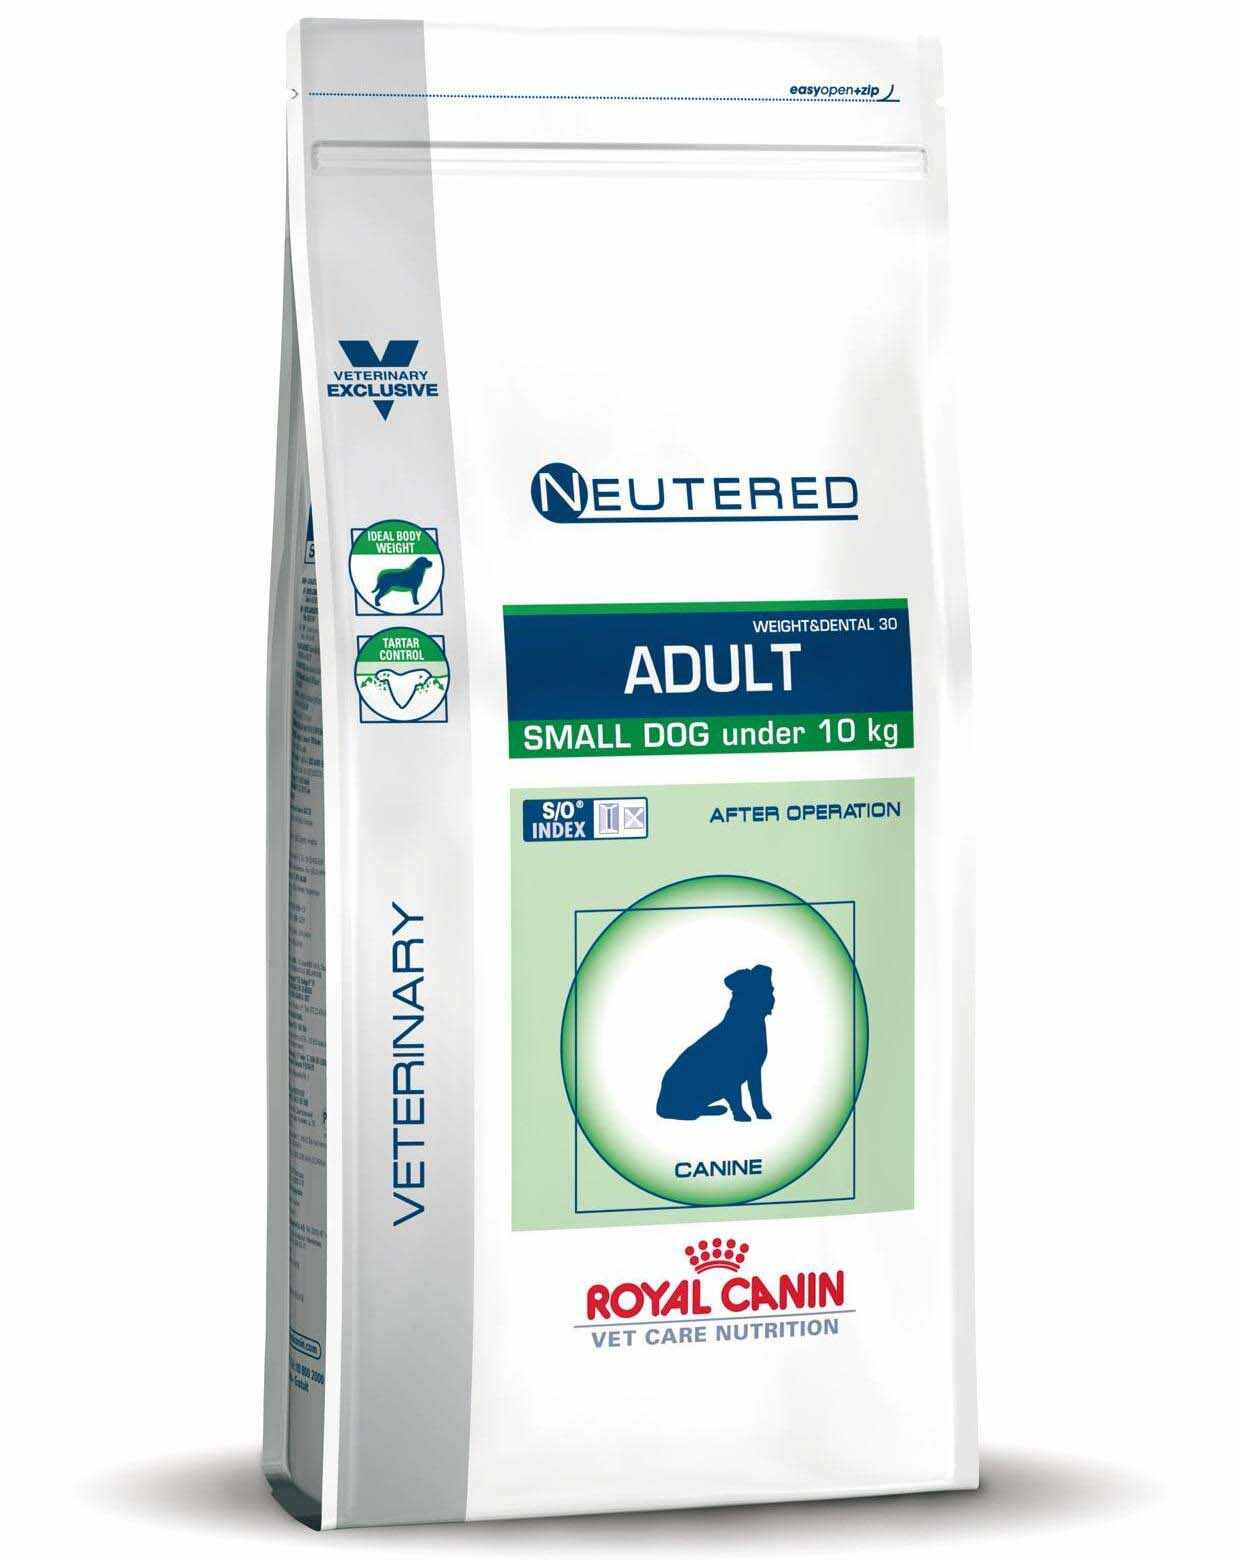 ROYAL CANIN VCN Neutered Adult Small Dog 1,5kg